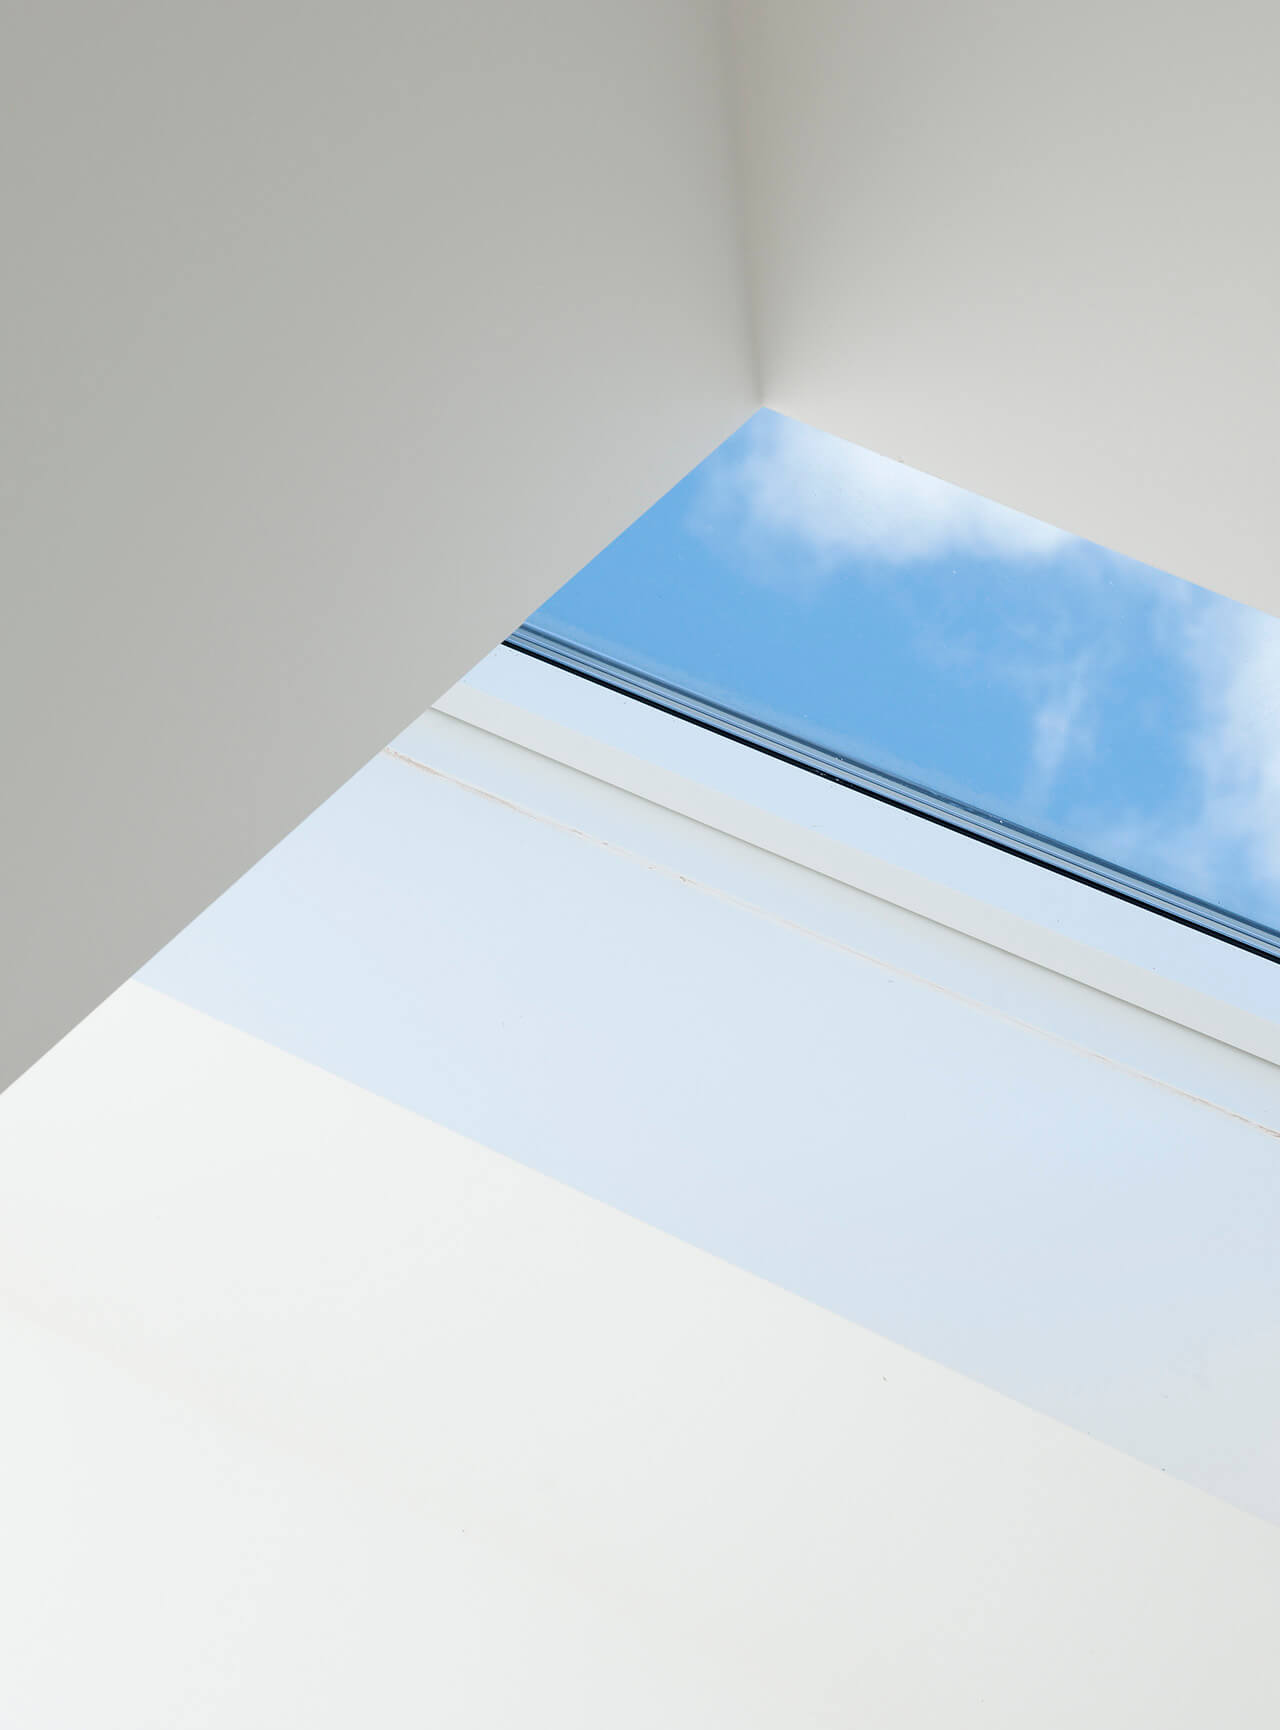 //sc10103.azureedge.net/-/media/products/16-9/flat-roof-window/curved-glass/img-carbonlight-homes.jpg?cx=0.5&cy=0.5